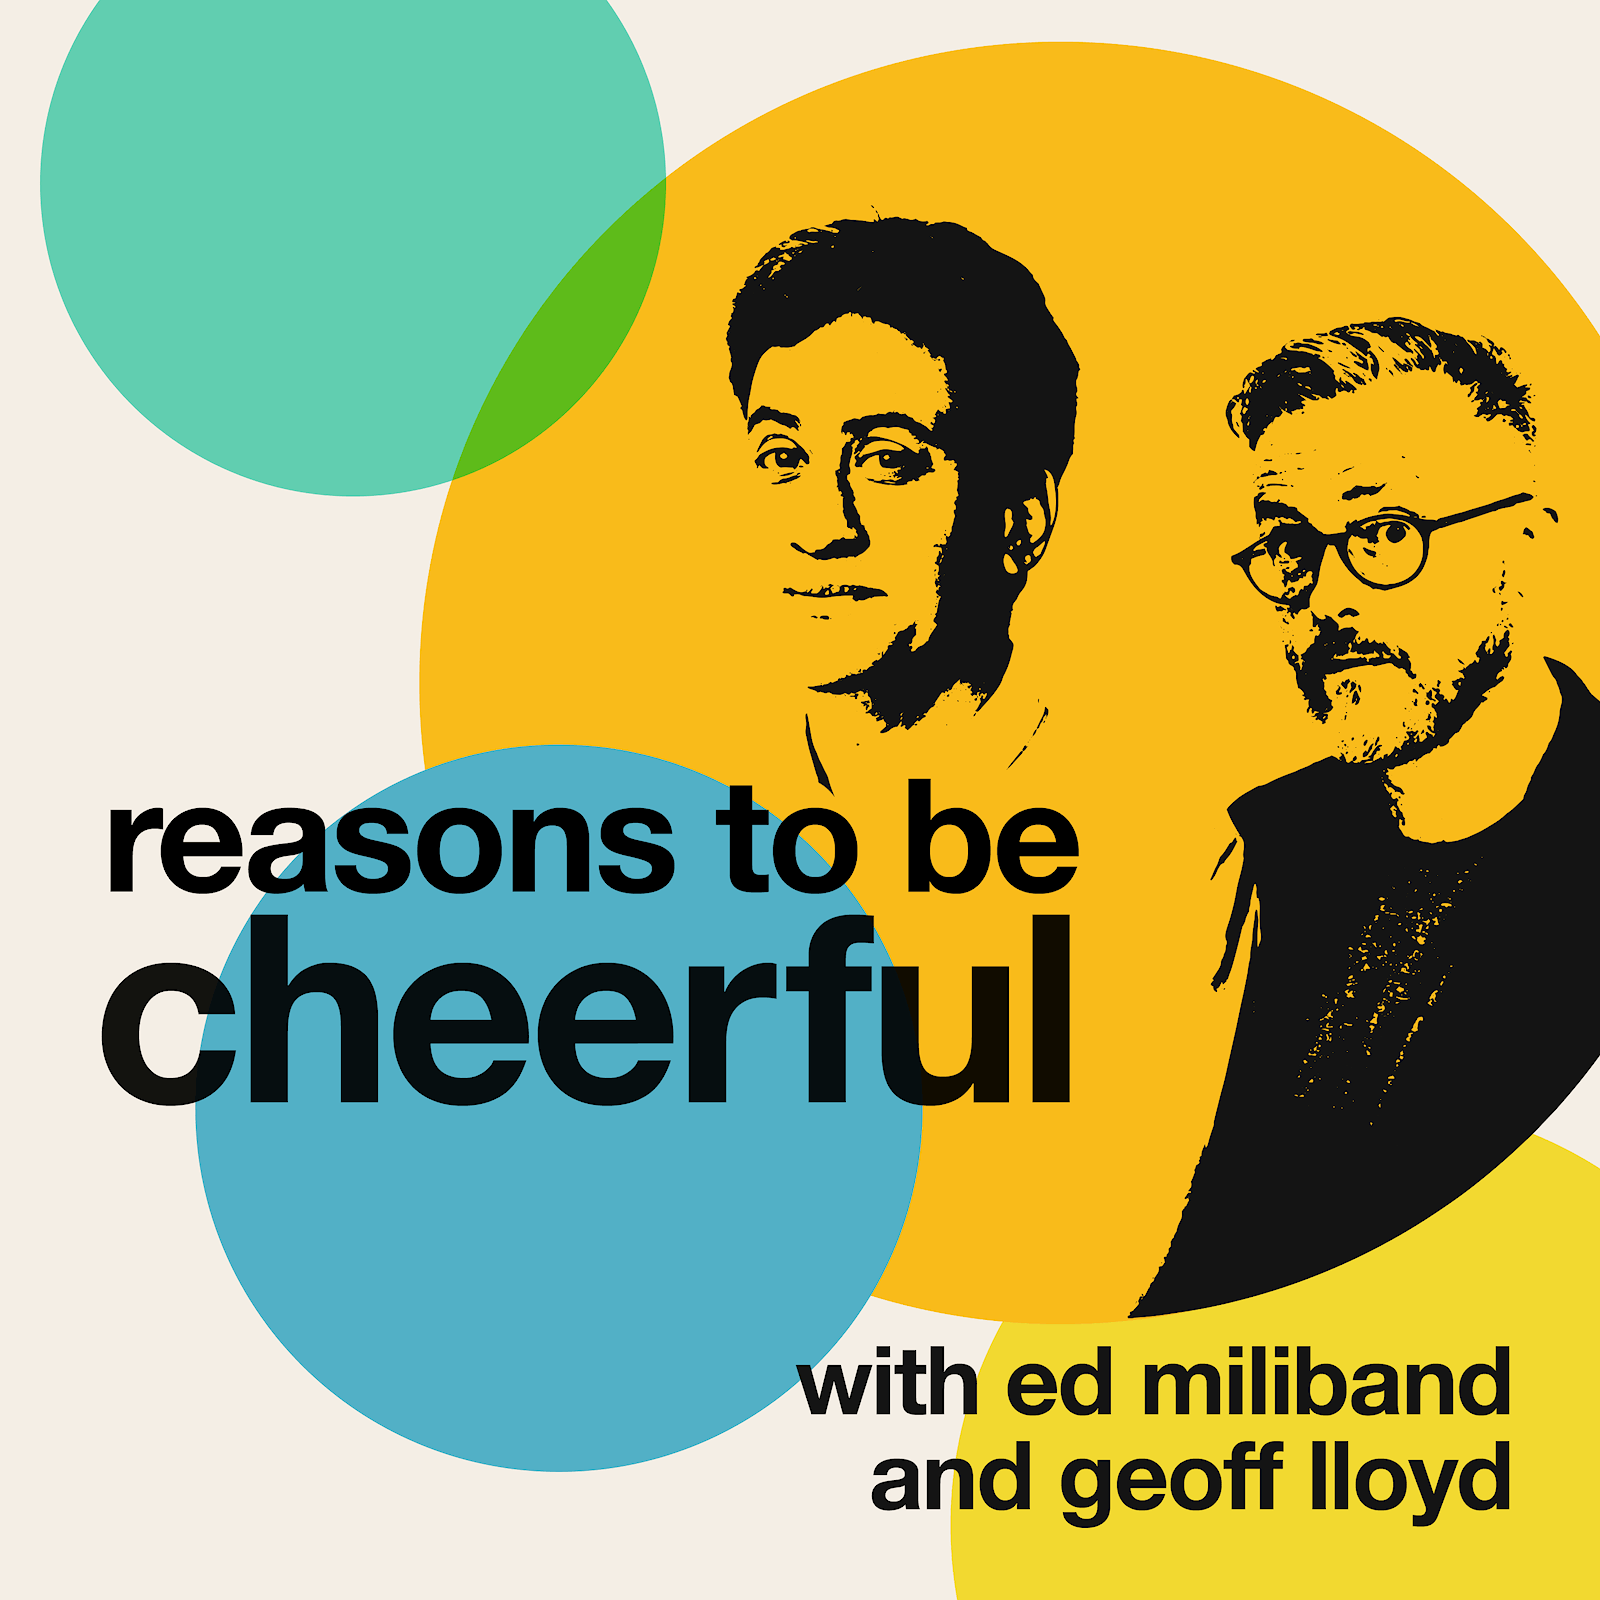 Graphic of  Ed Miliband and Geoff Lloyd with the text "Reasons to the cheerful"